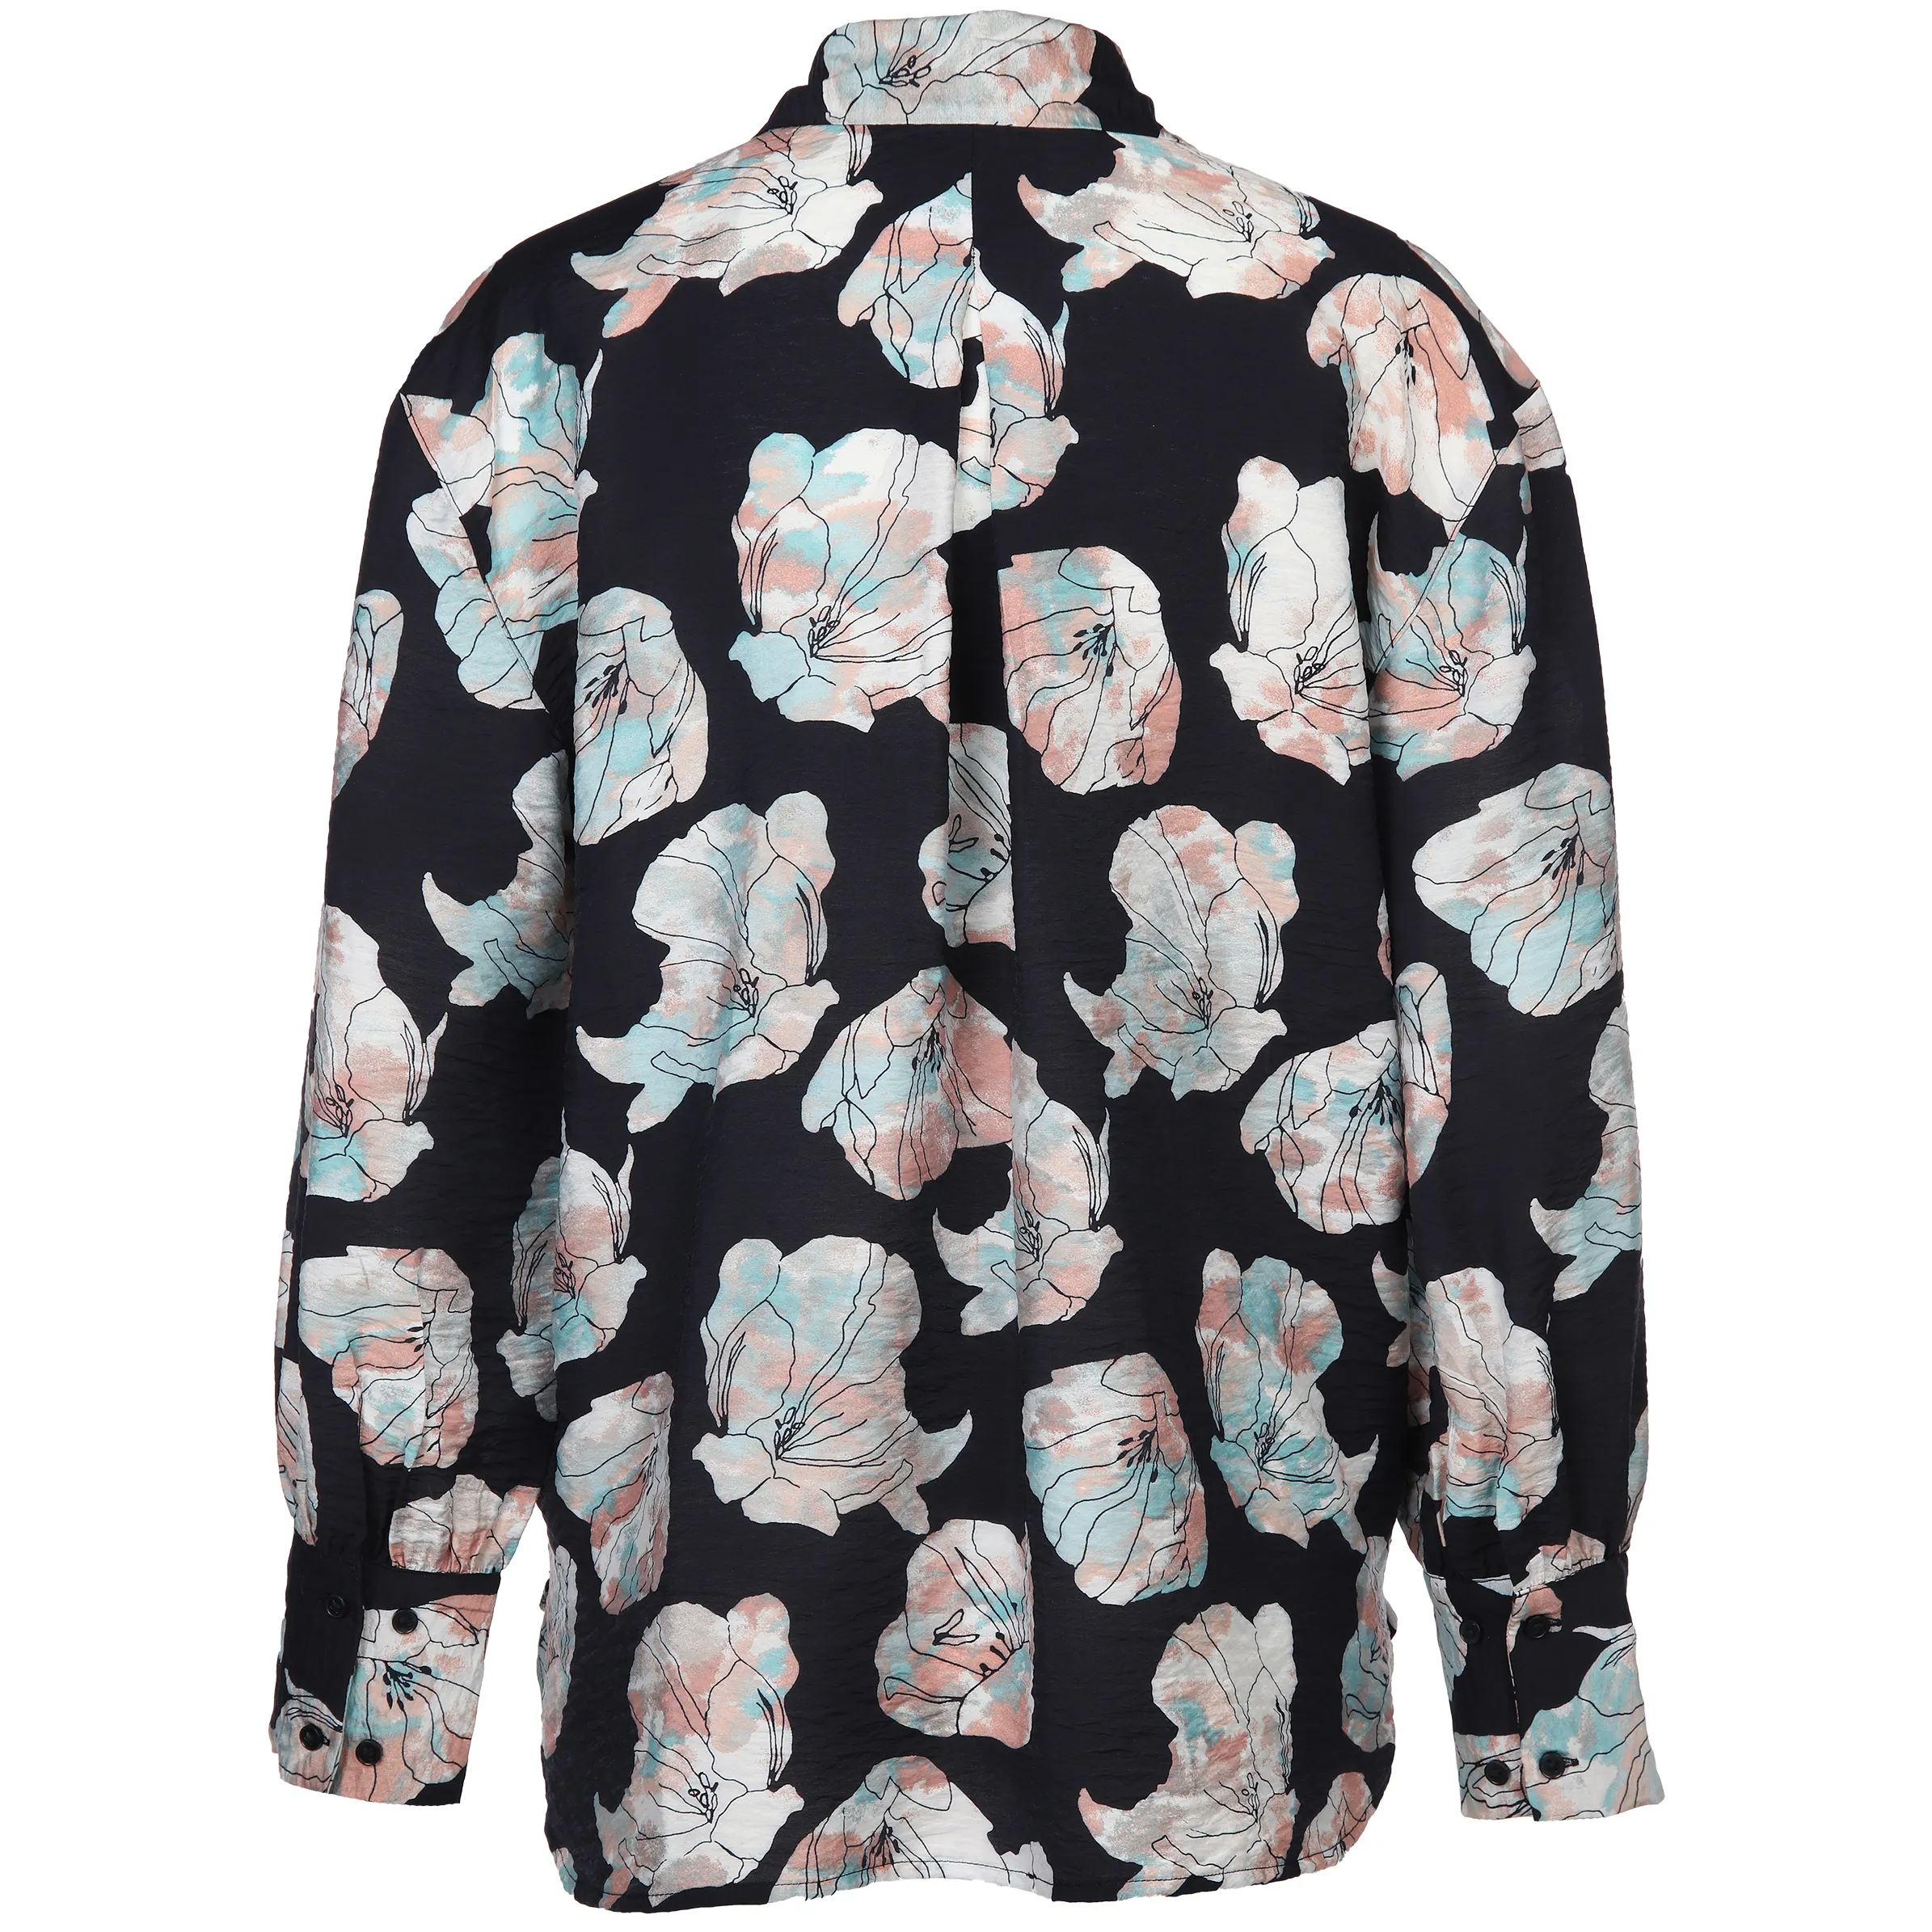 Tom Tailor 1037889 printed blouse with collar Marine 883831 32413 2